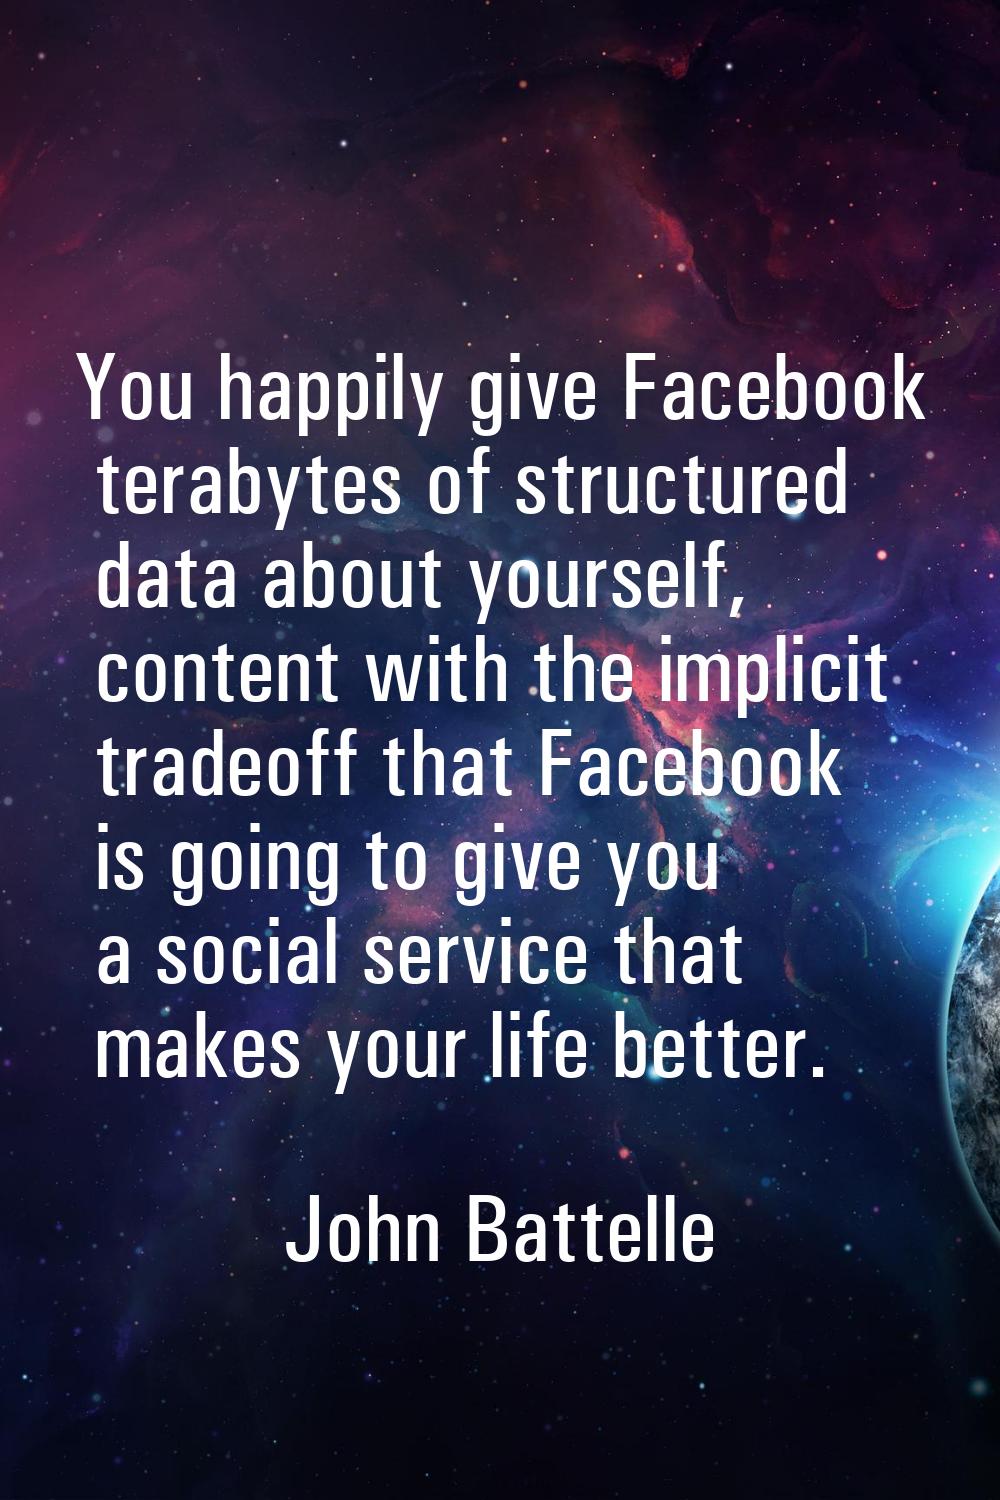 You happily give Facebook terabytes of structured data about yourself, content with the implicit tr